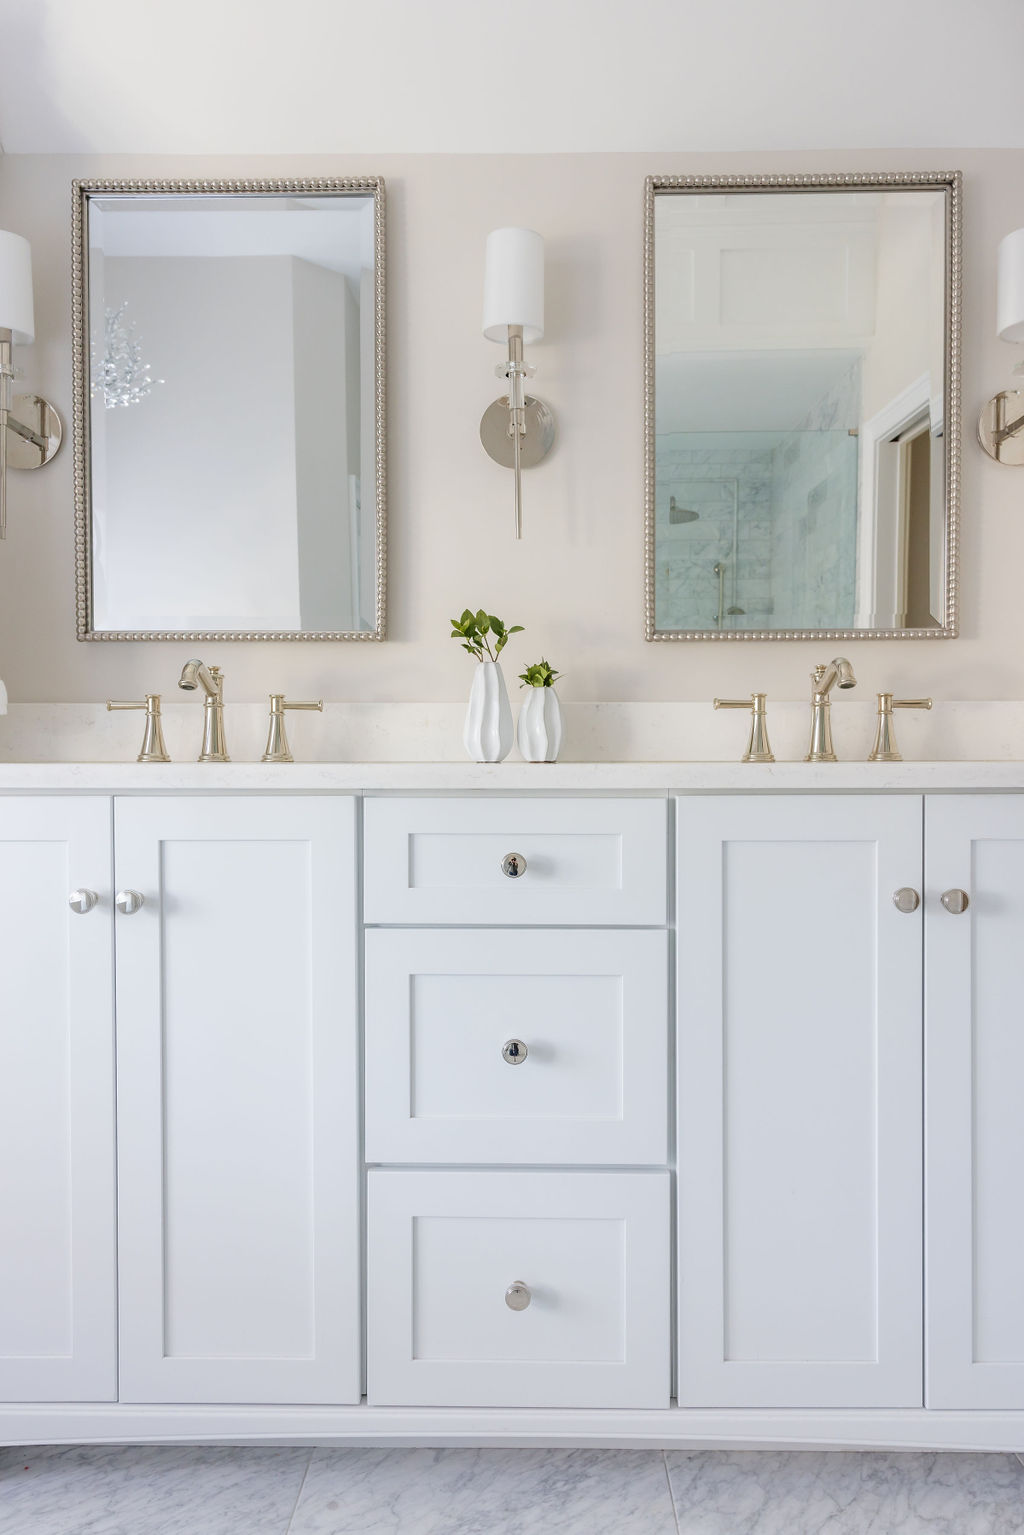 The Ceiling Can’t Hold Us: A Luxurious Bathroom Transformation